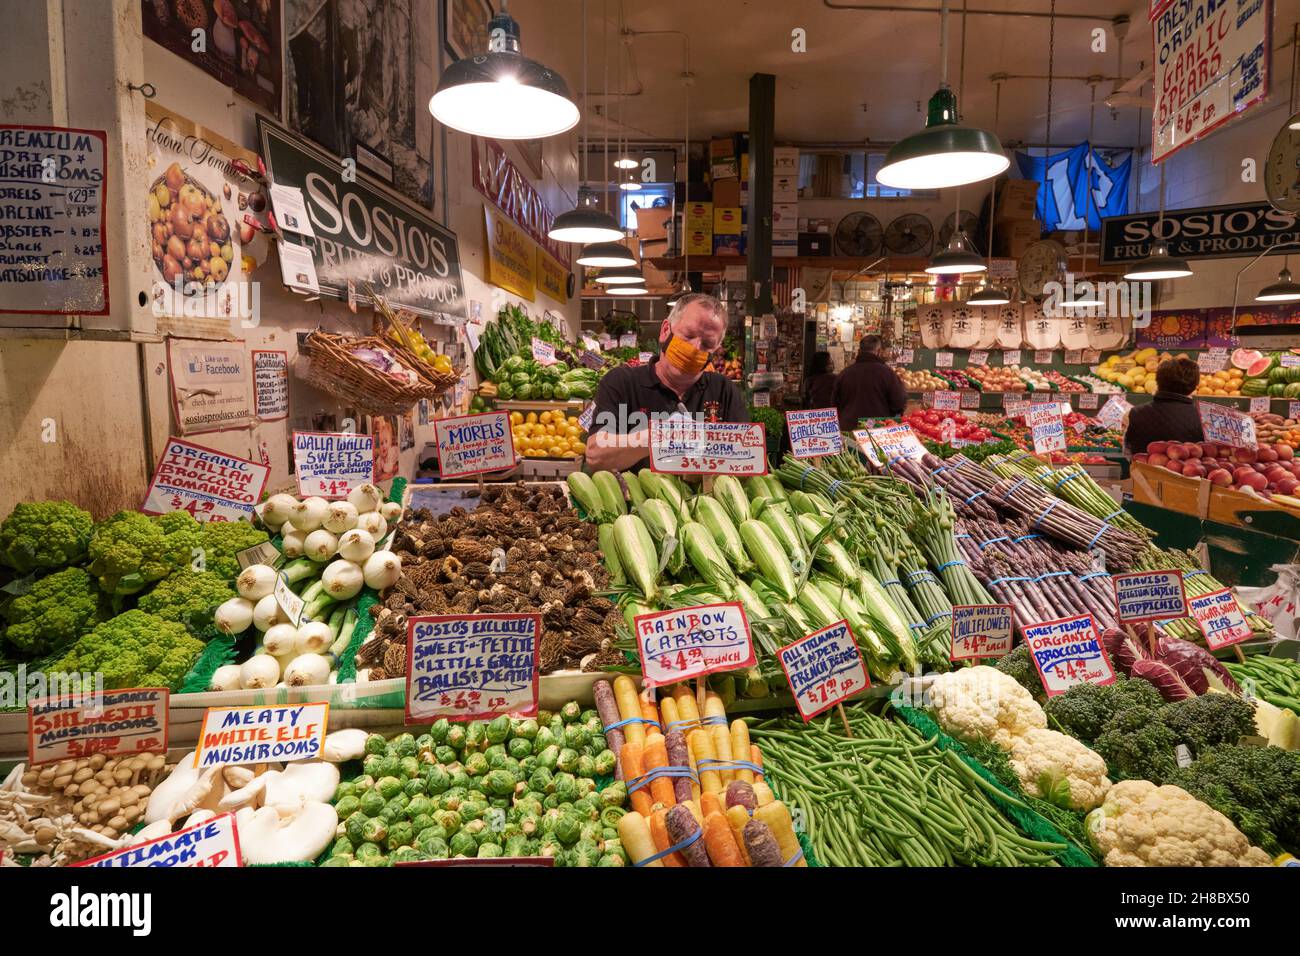 Sosio's - long-running fruit and produce stand in Pike place Public market Stock Photo